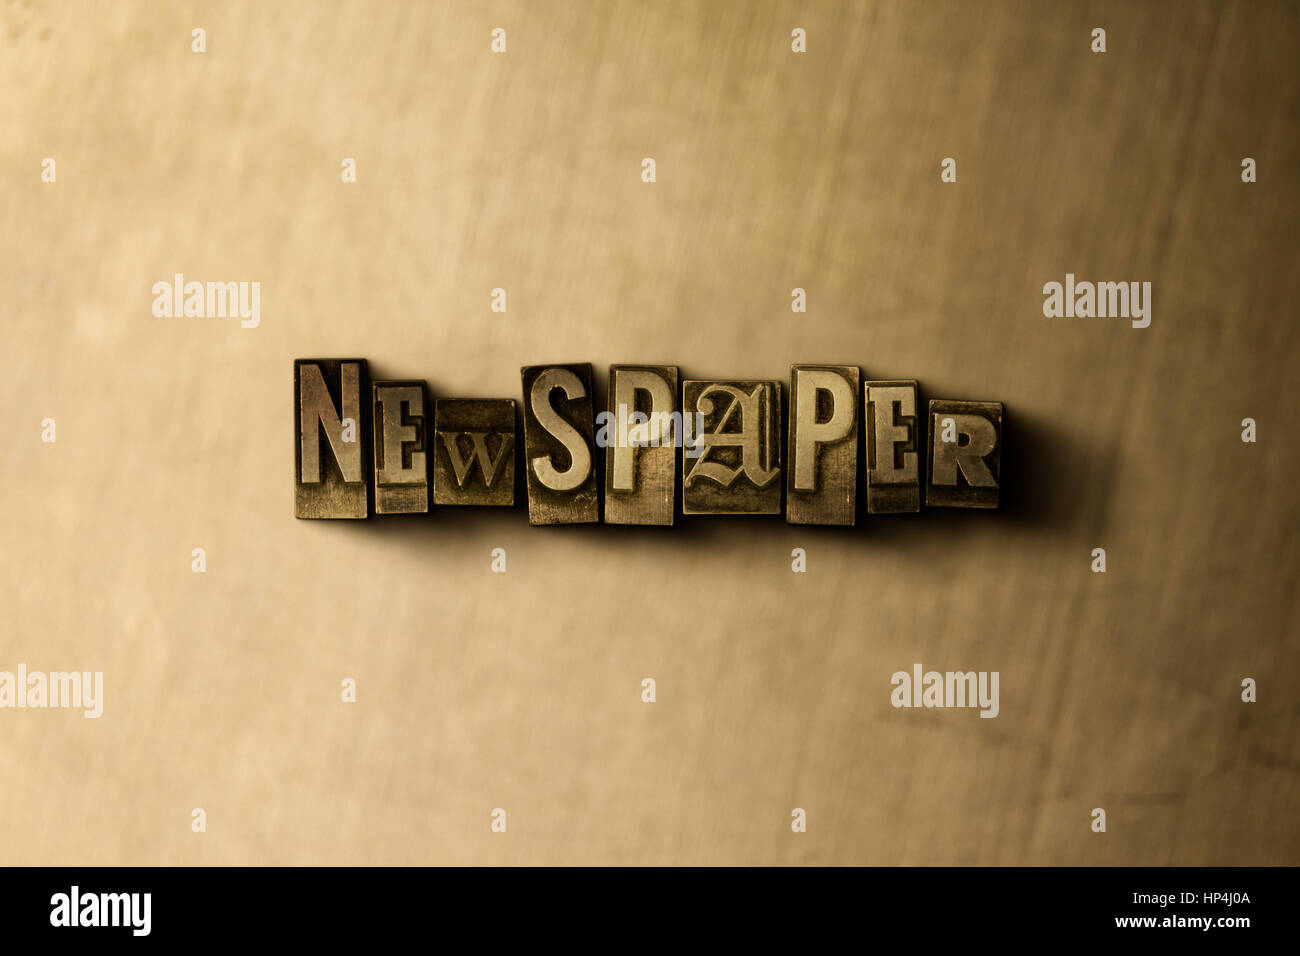 NEWSPAPER - close-up of grungy vintage typeset word on metal backdrop. Royalty free stock illustration.  Can be used for online banner ads and direct  Stock Photo